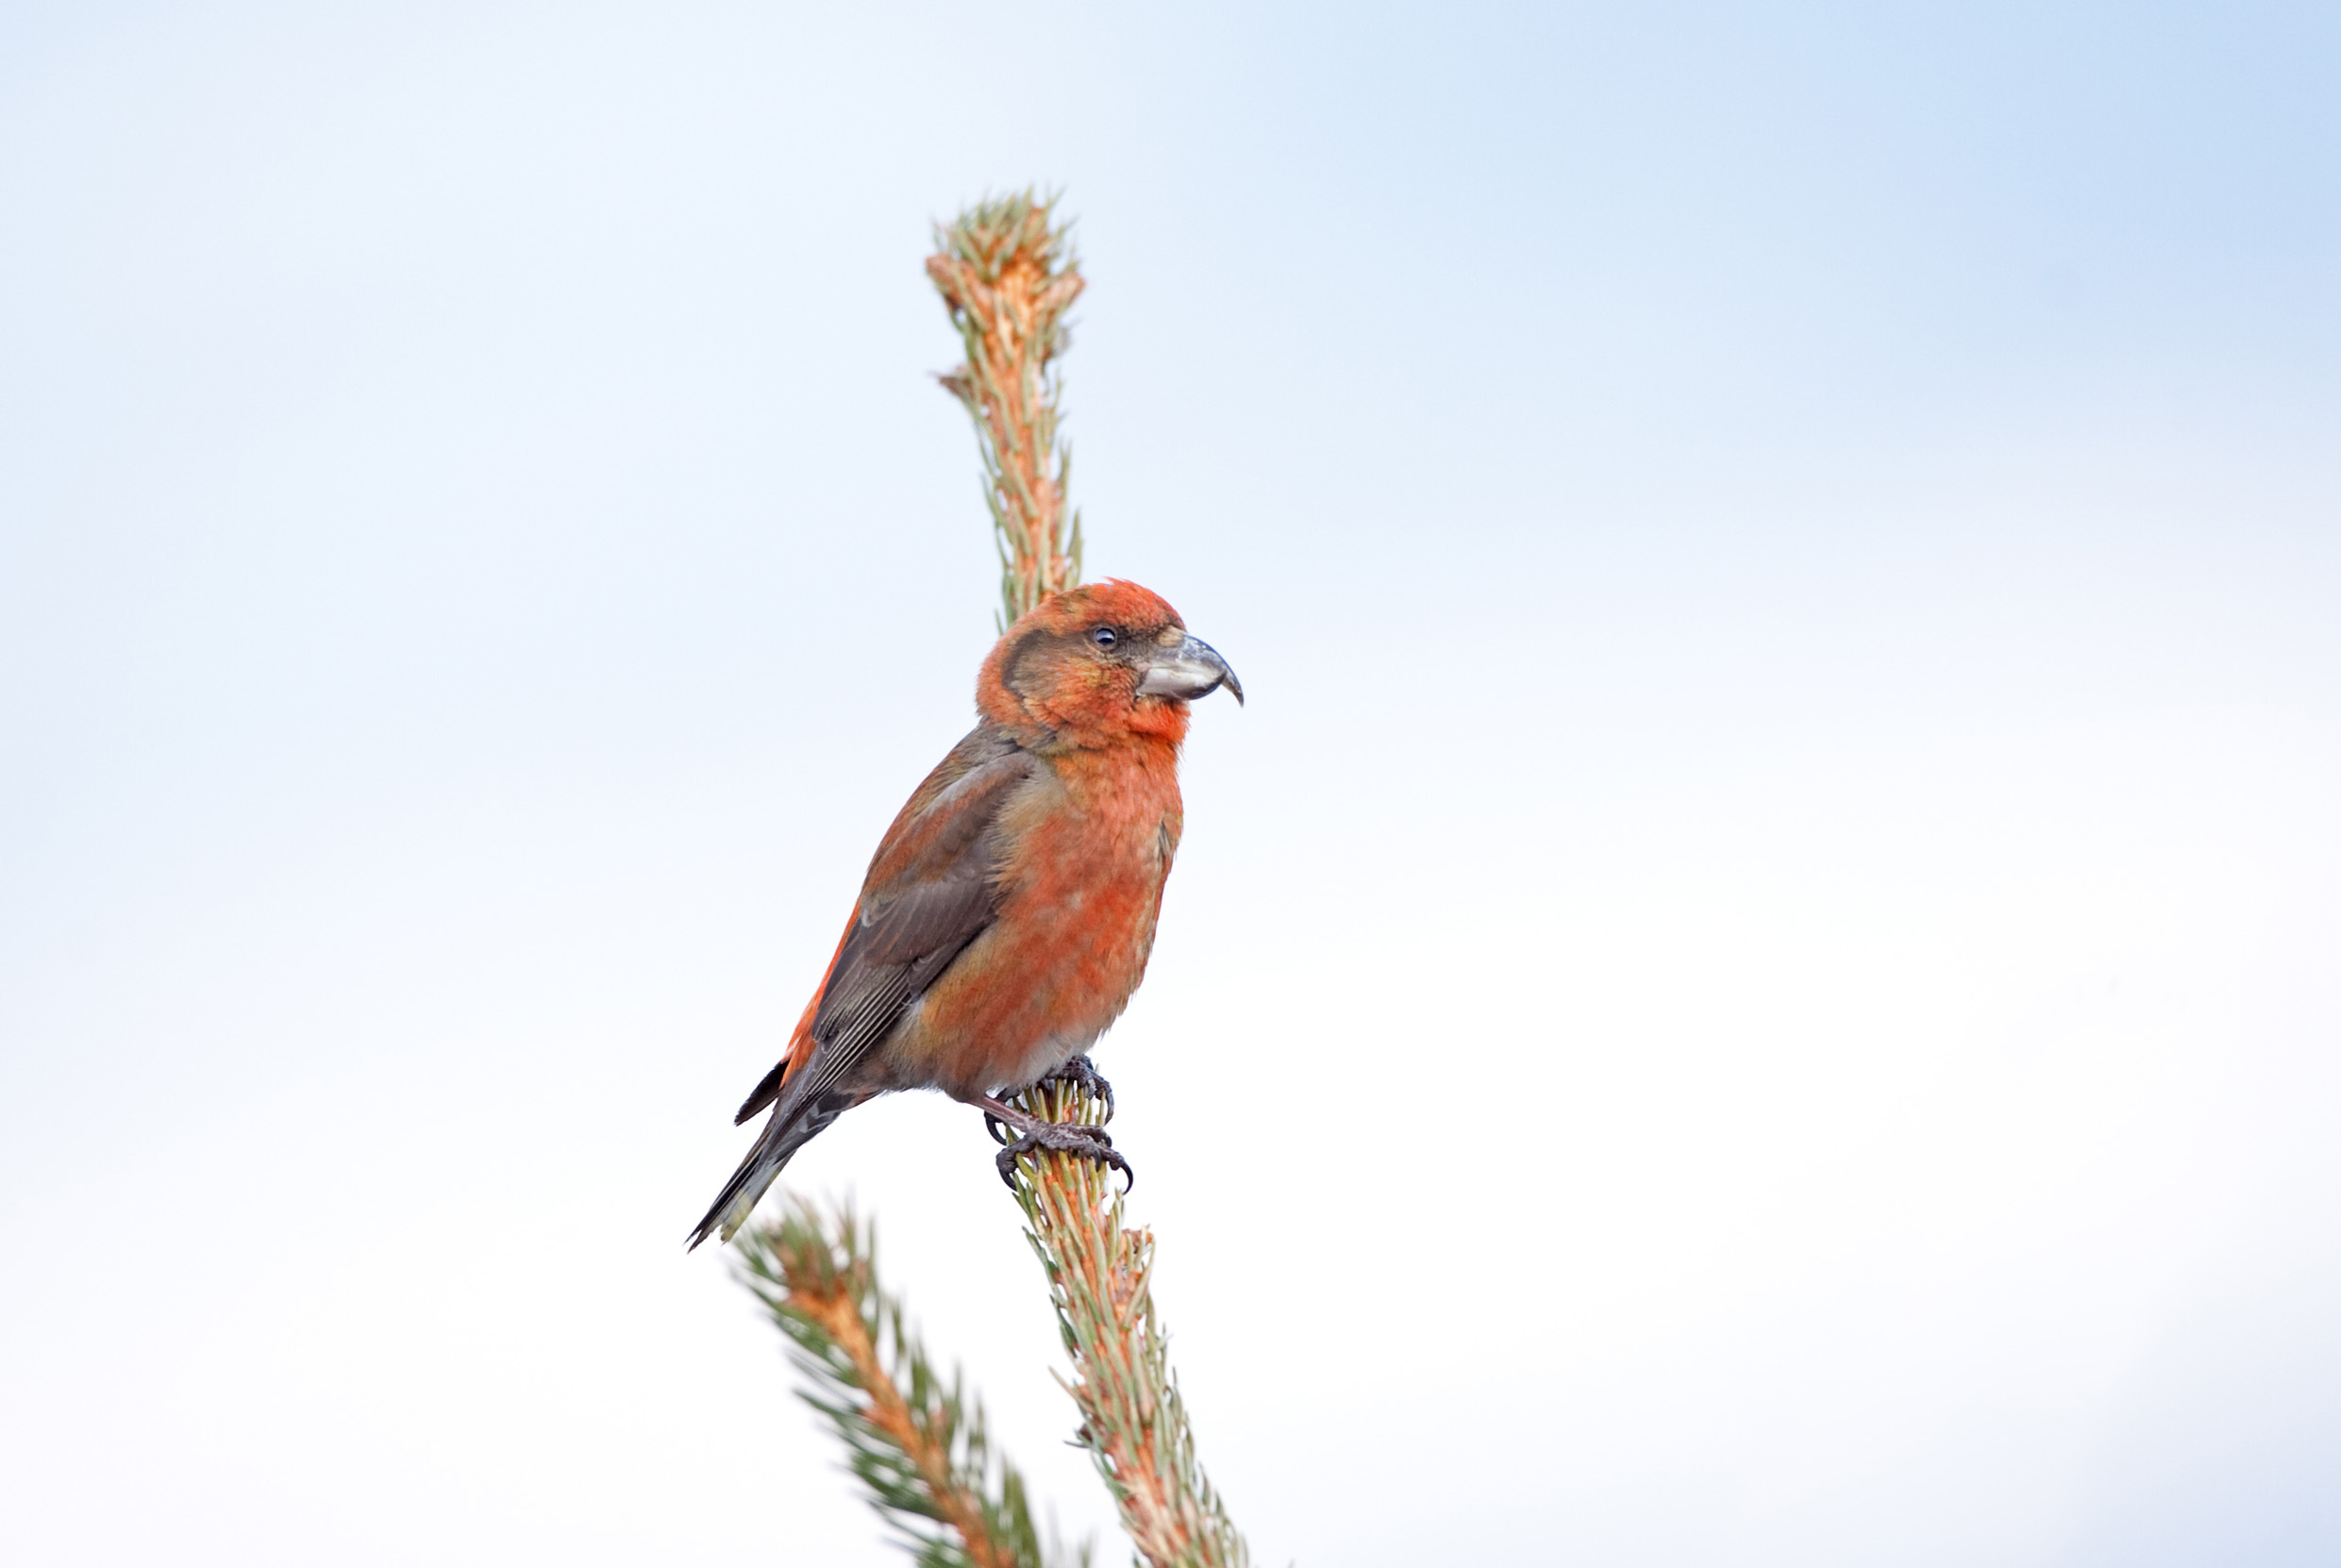 Lone male Crossbill perched on a branch.